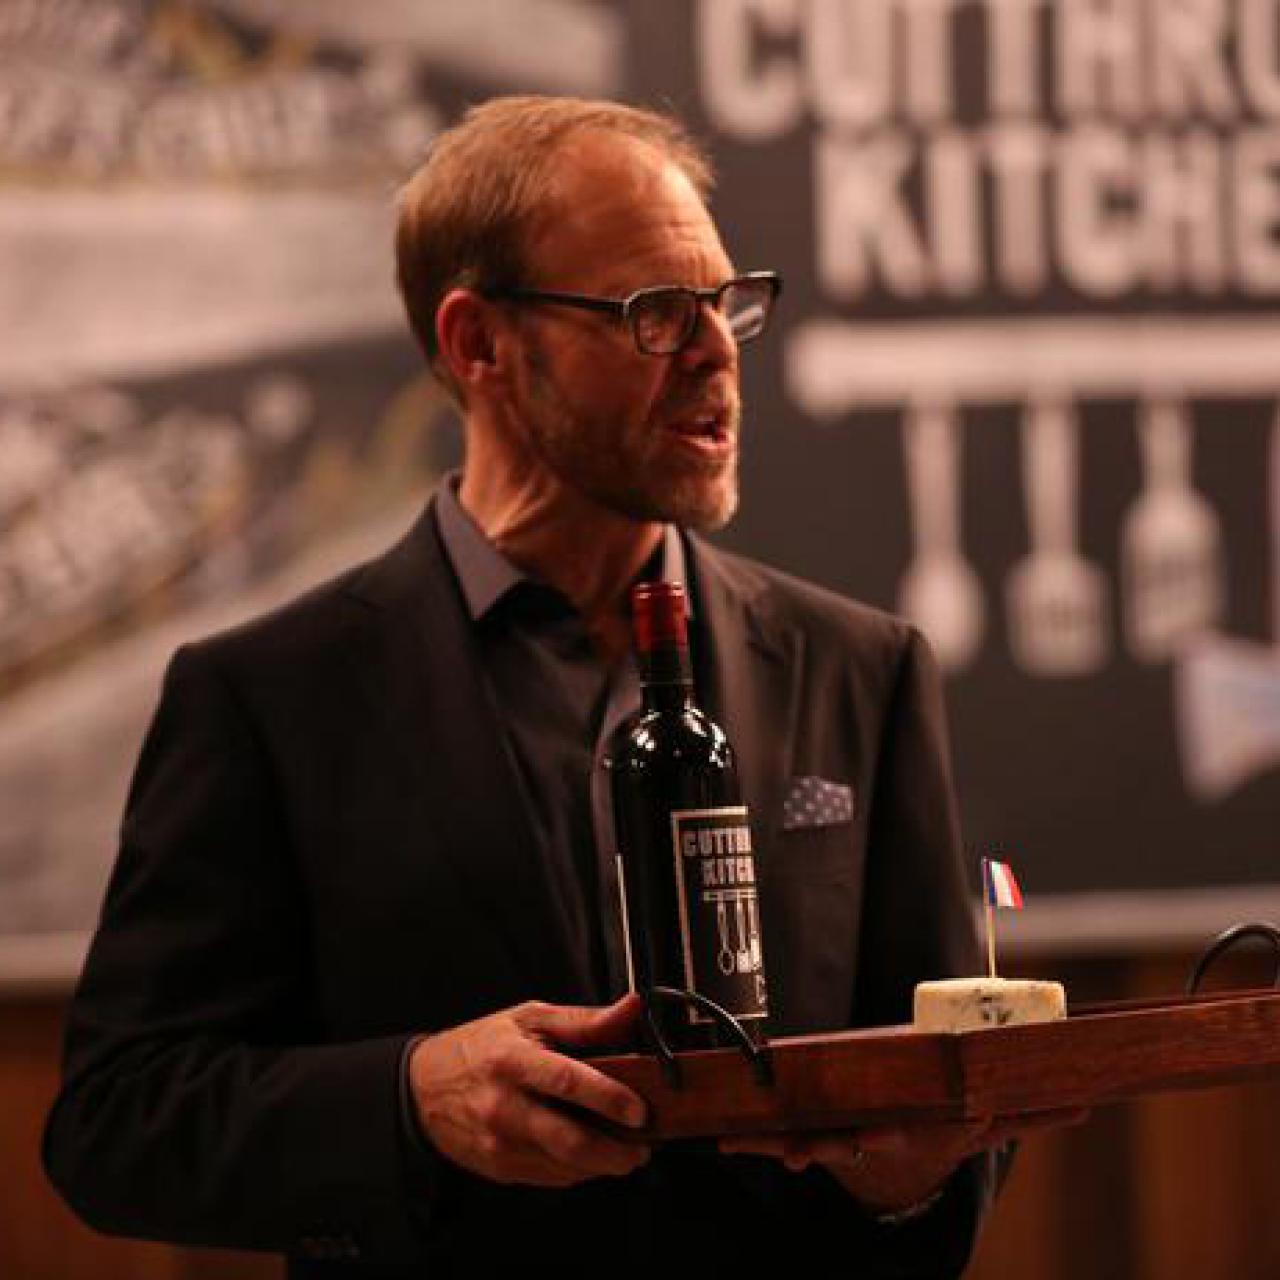 Alton Brown Shares His Sabotage Secrets From Cutthroat Kitchen - Exclusive